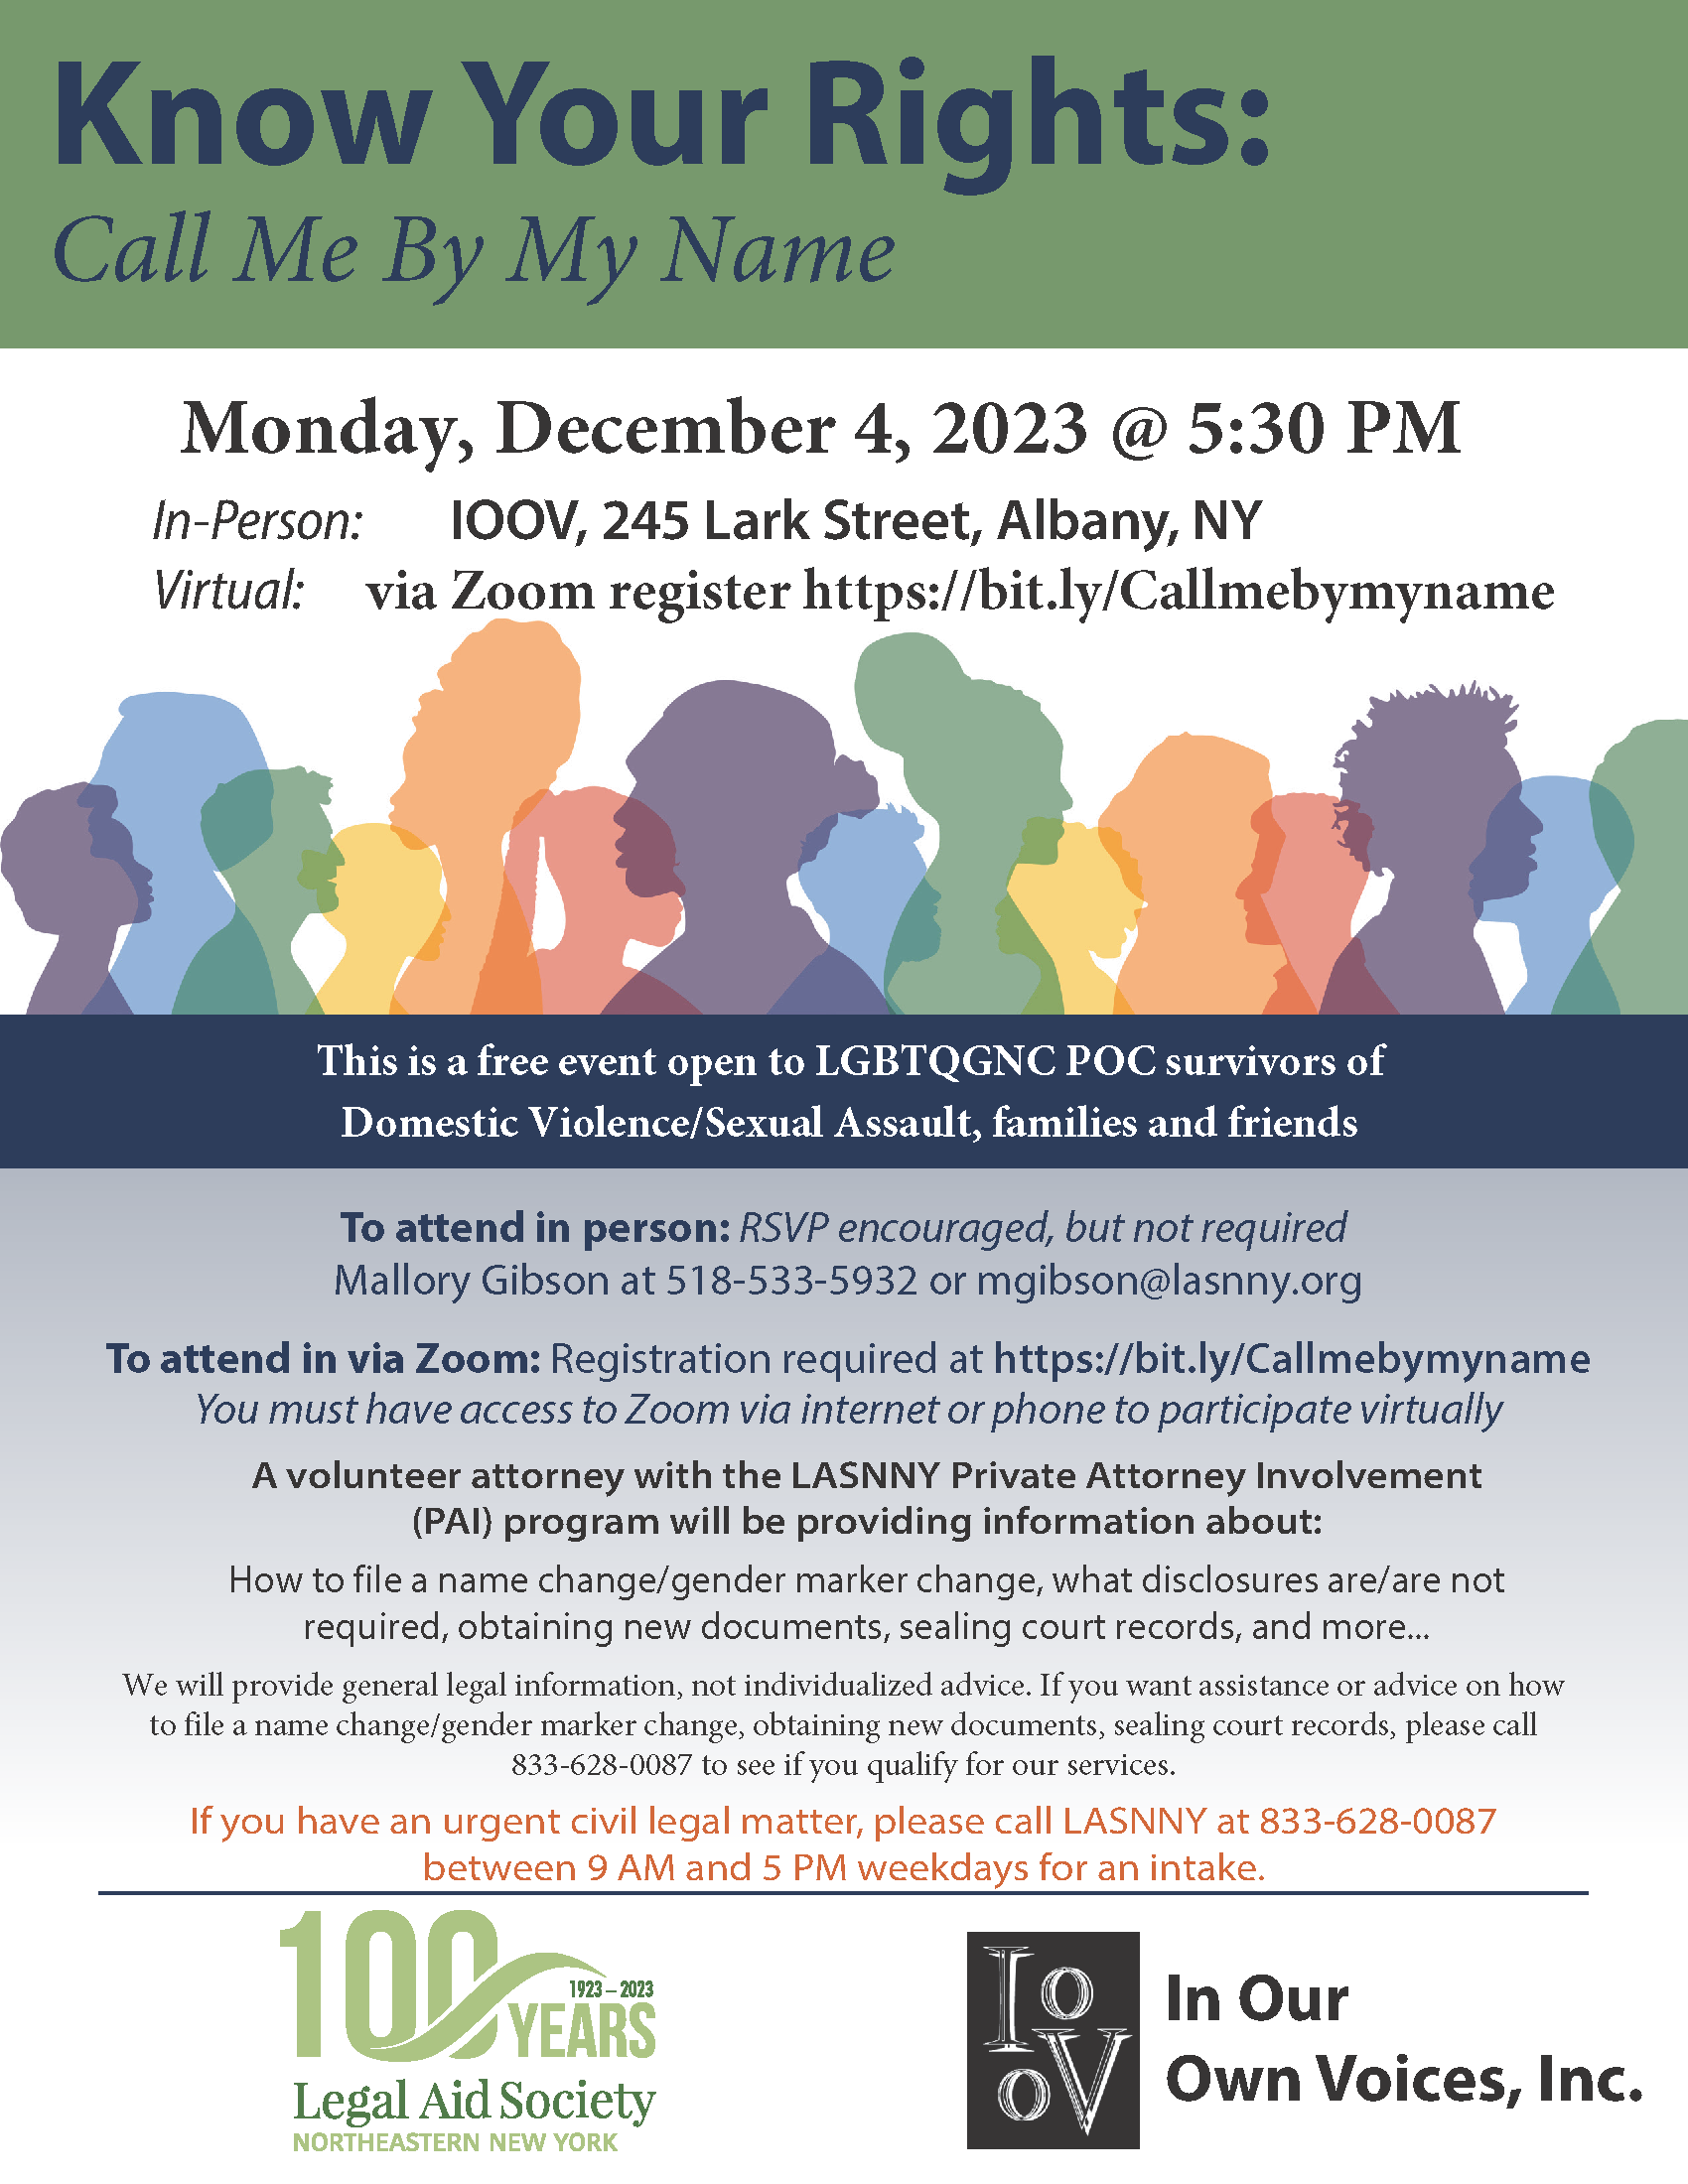 Know Your Rights: Call Me by My Name Virtual and In-Person Clinic